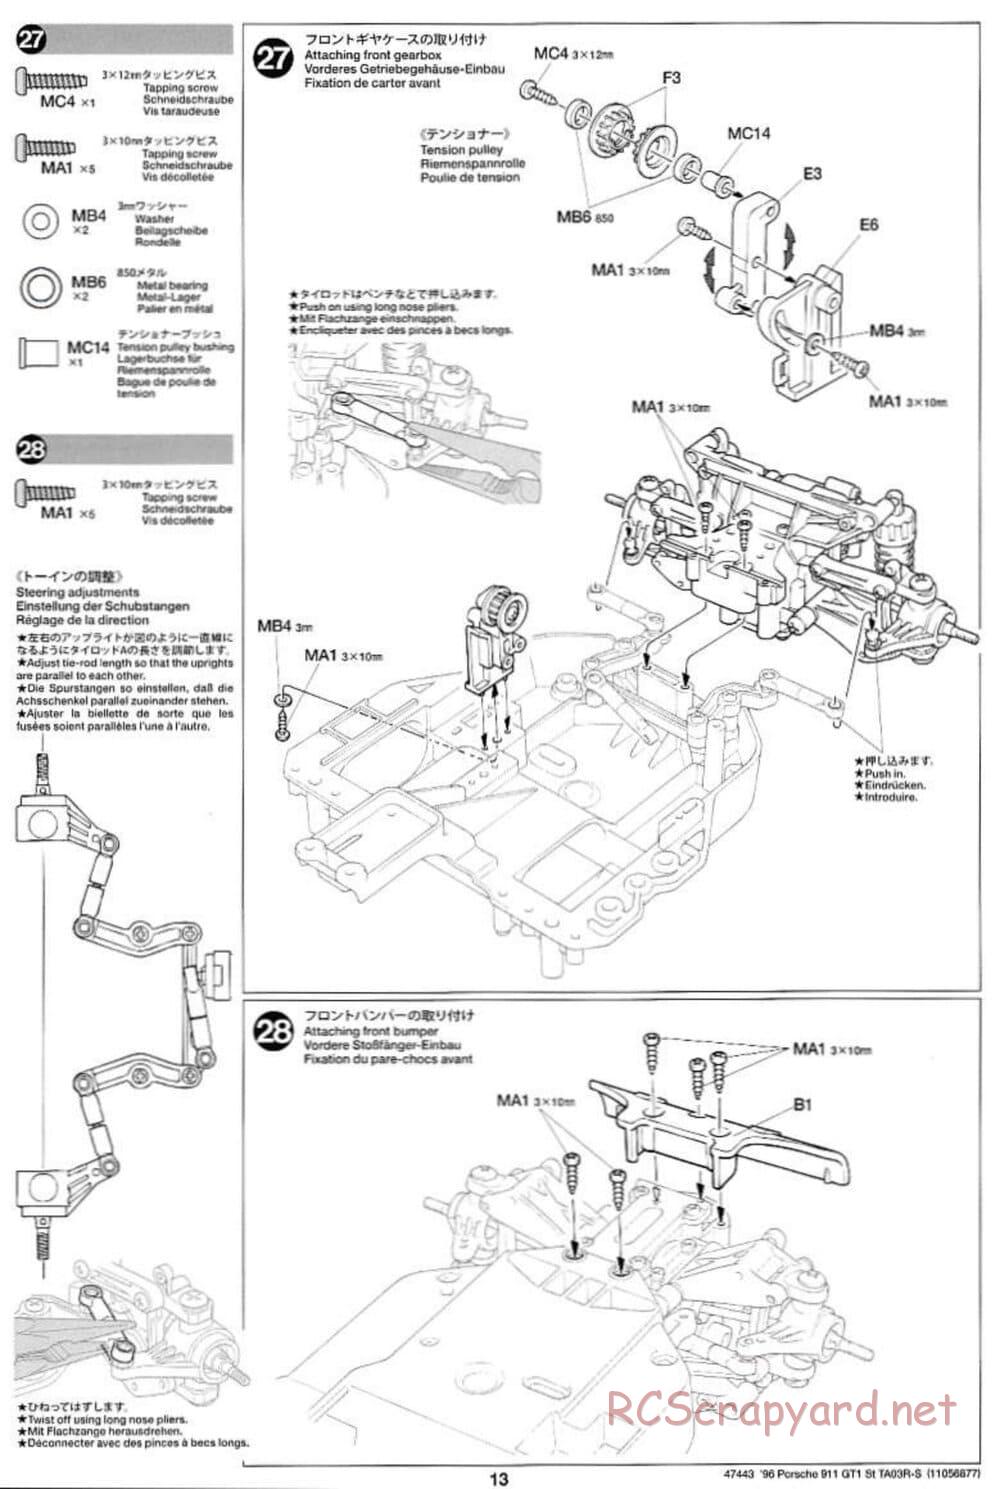 Tamiya - Porsche 911 GT1 Street - TA-03RS Chassis - Manual - Page 13